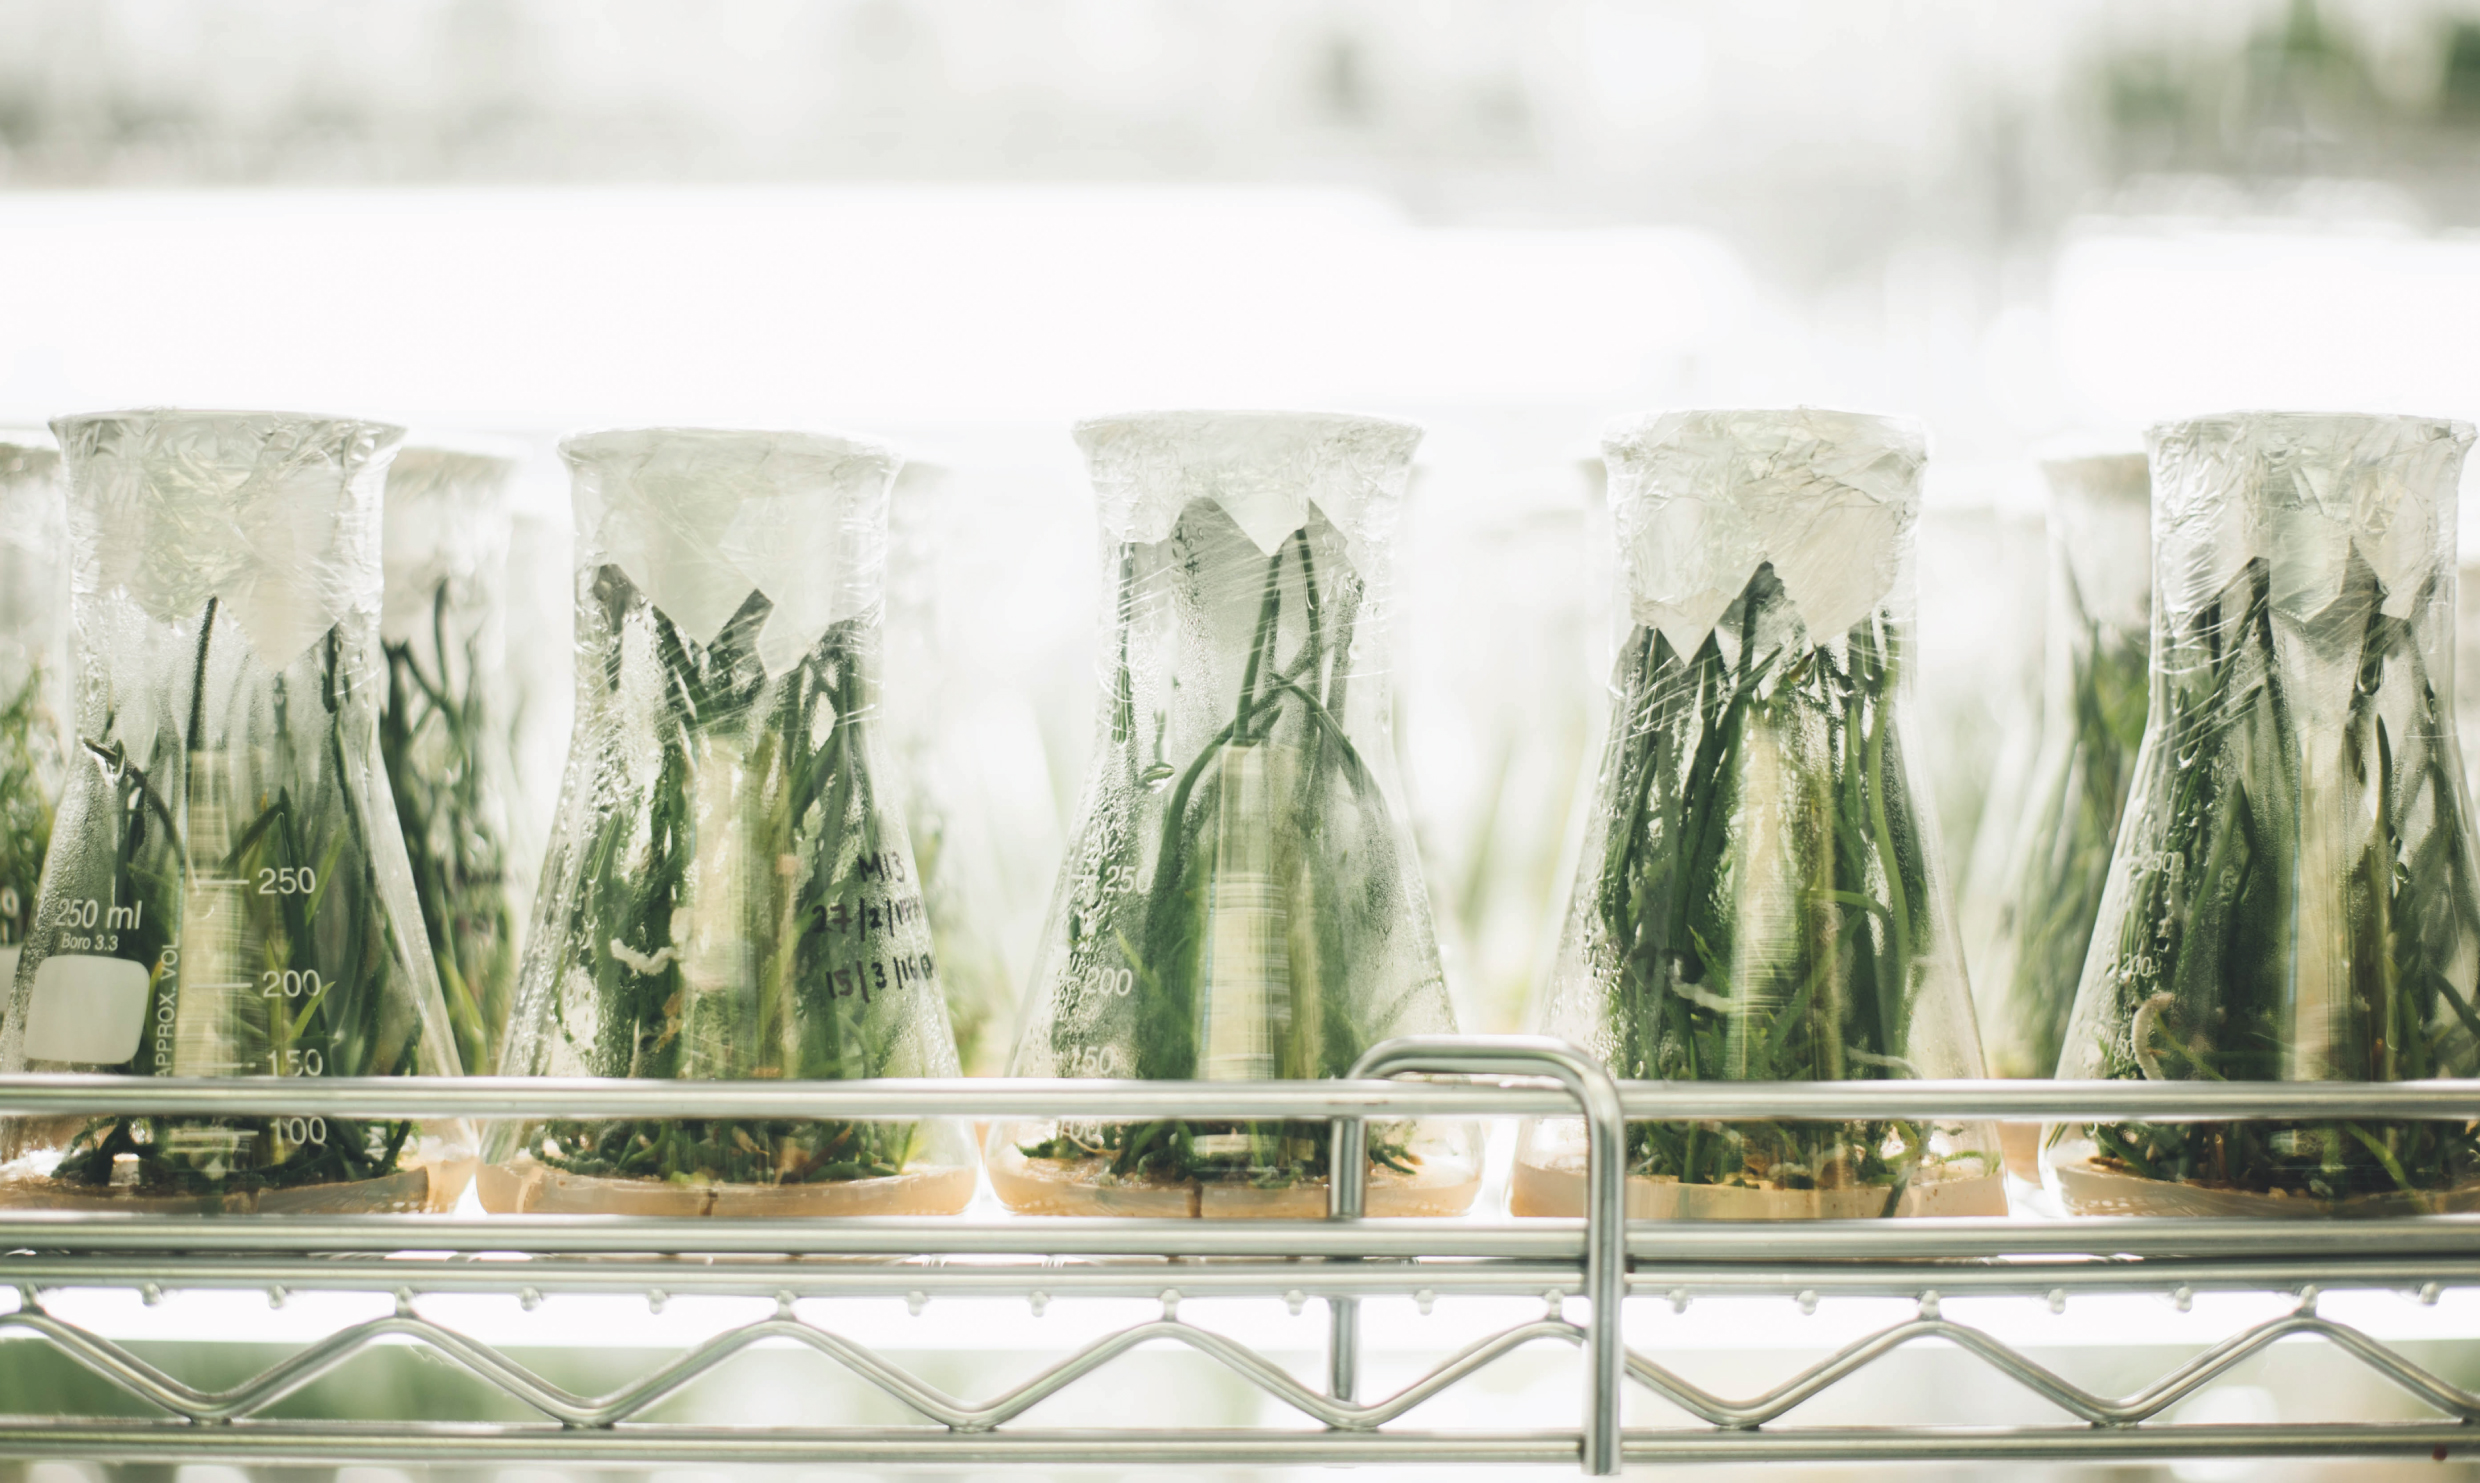 A row of beakers with plants in them.